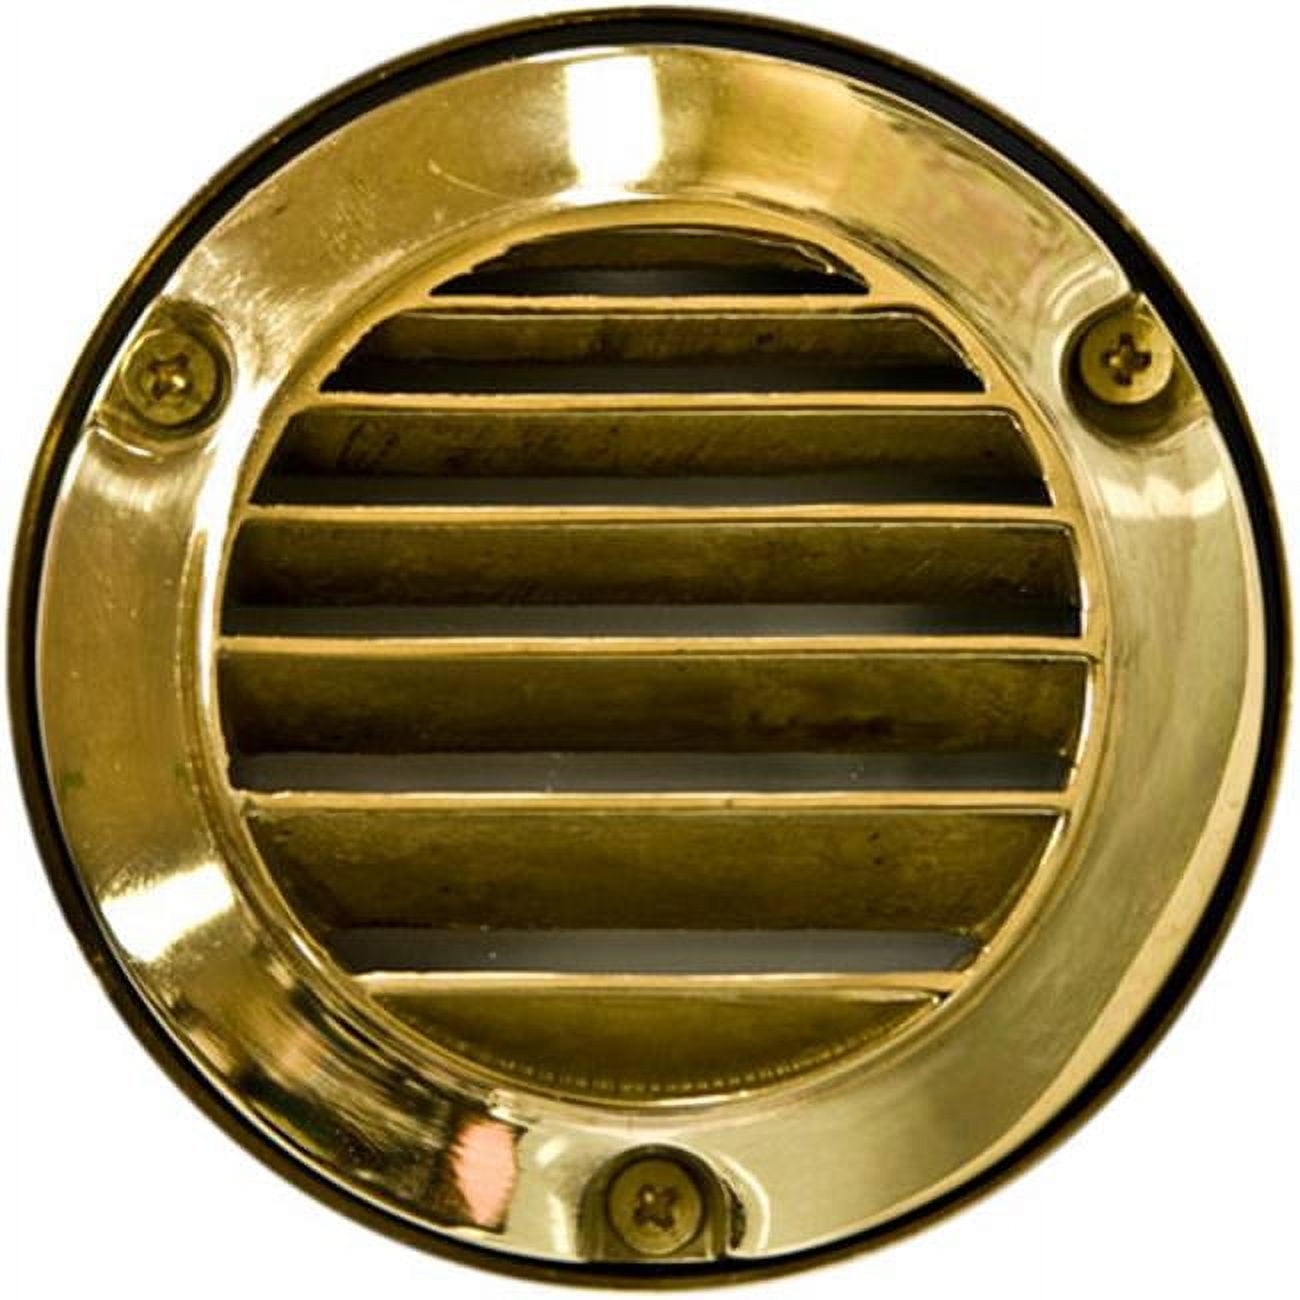 Picture of Dabmar Lighting LV610 Brass Surface Mount Brick, Step, Wall & Deck Light, Brass - 3.89 x 3.89 x 1.74 in.